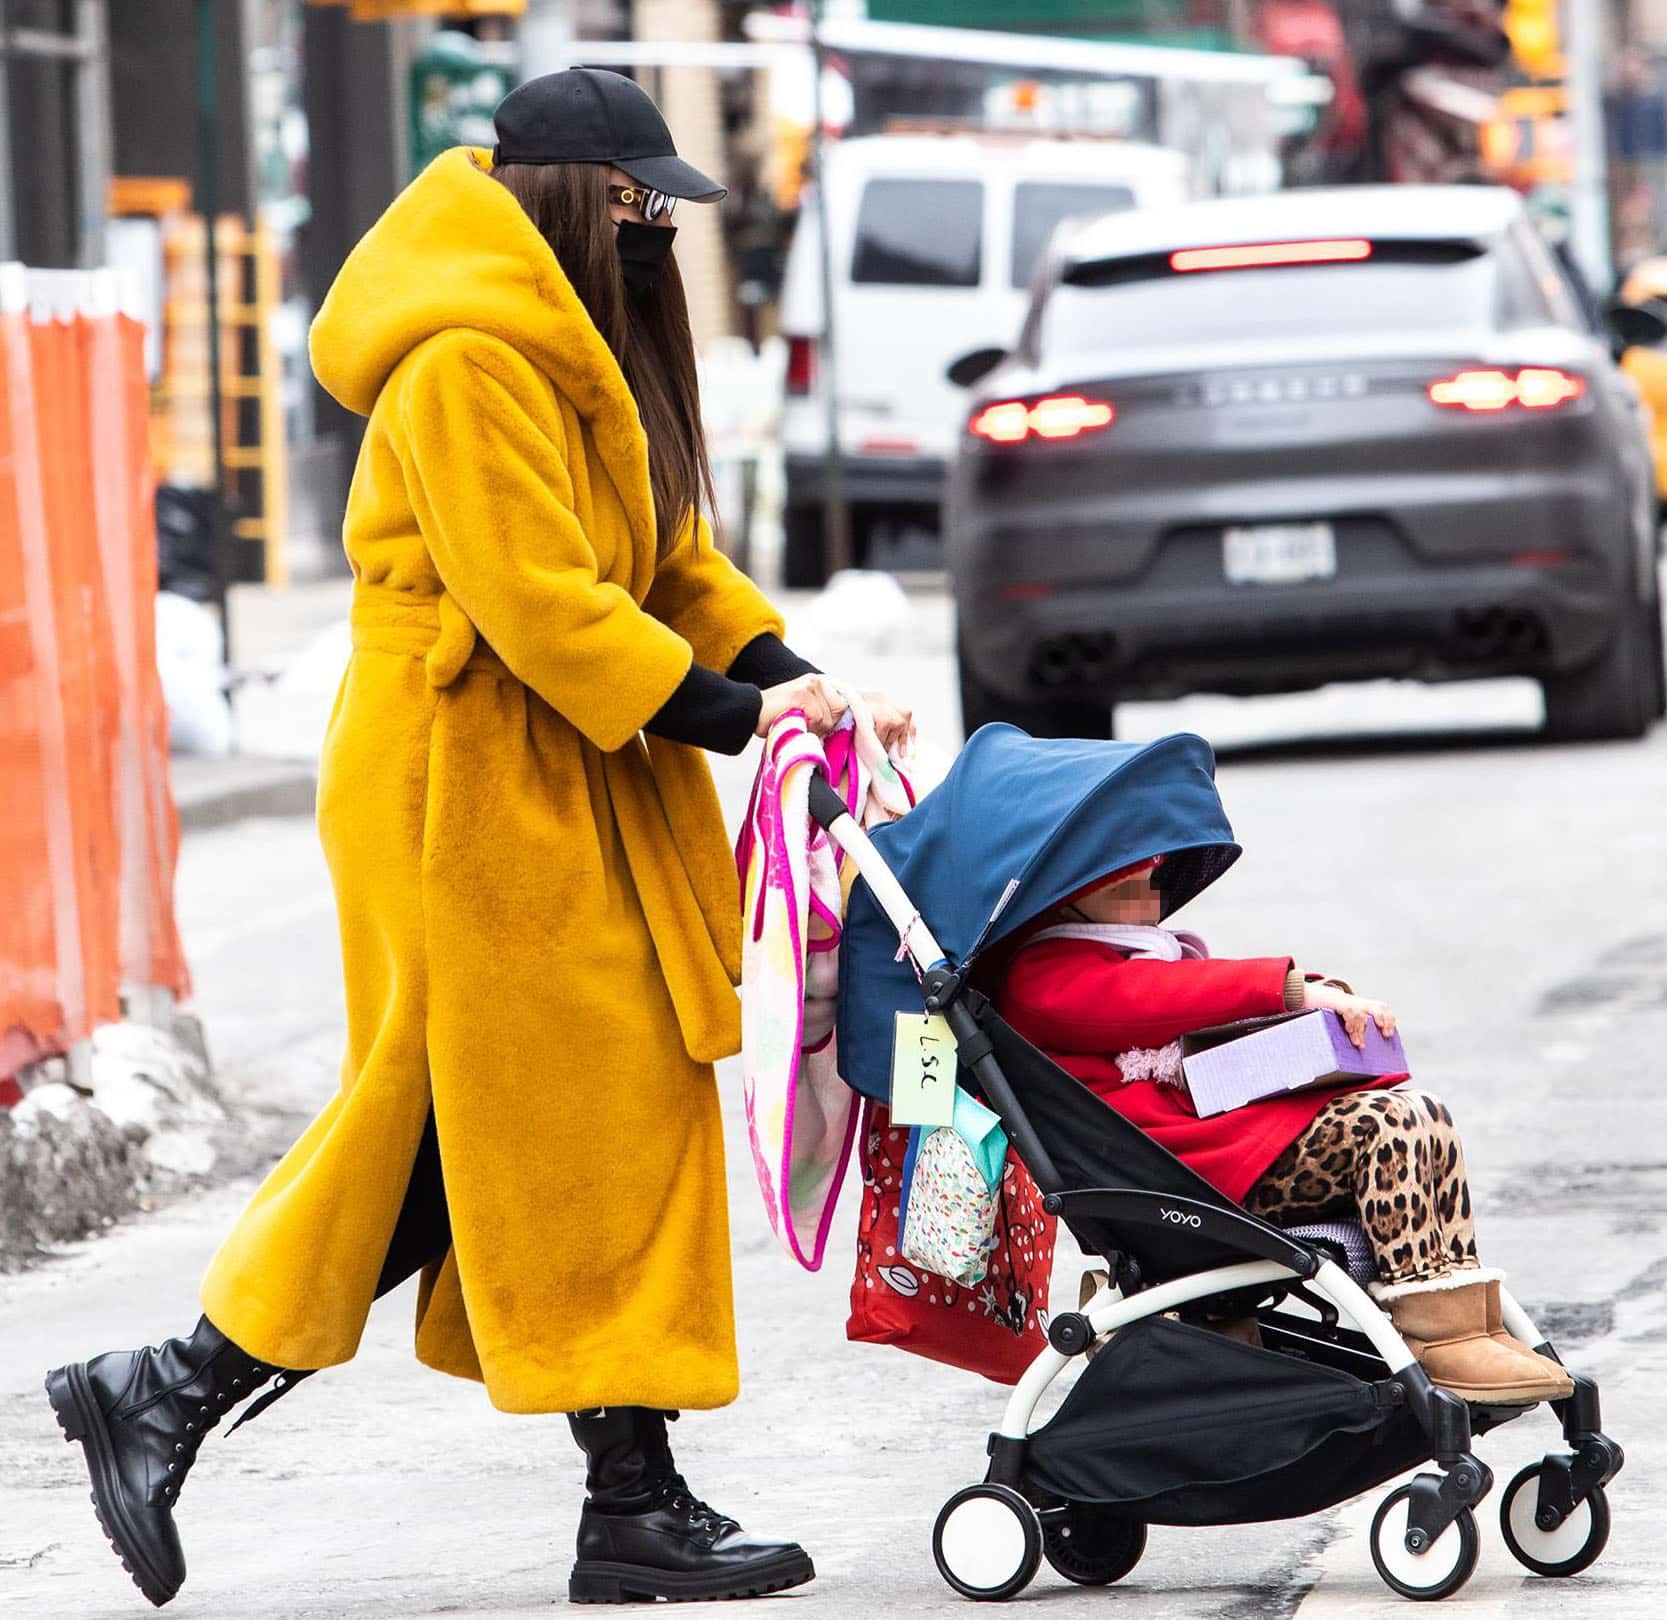 Irina Shayk pushes her daughter's stroller while strolling around Greenwich Village on February 12, 2021